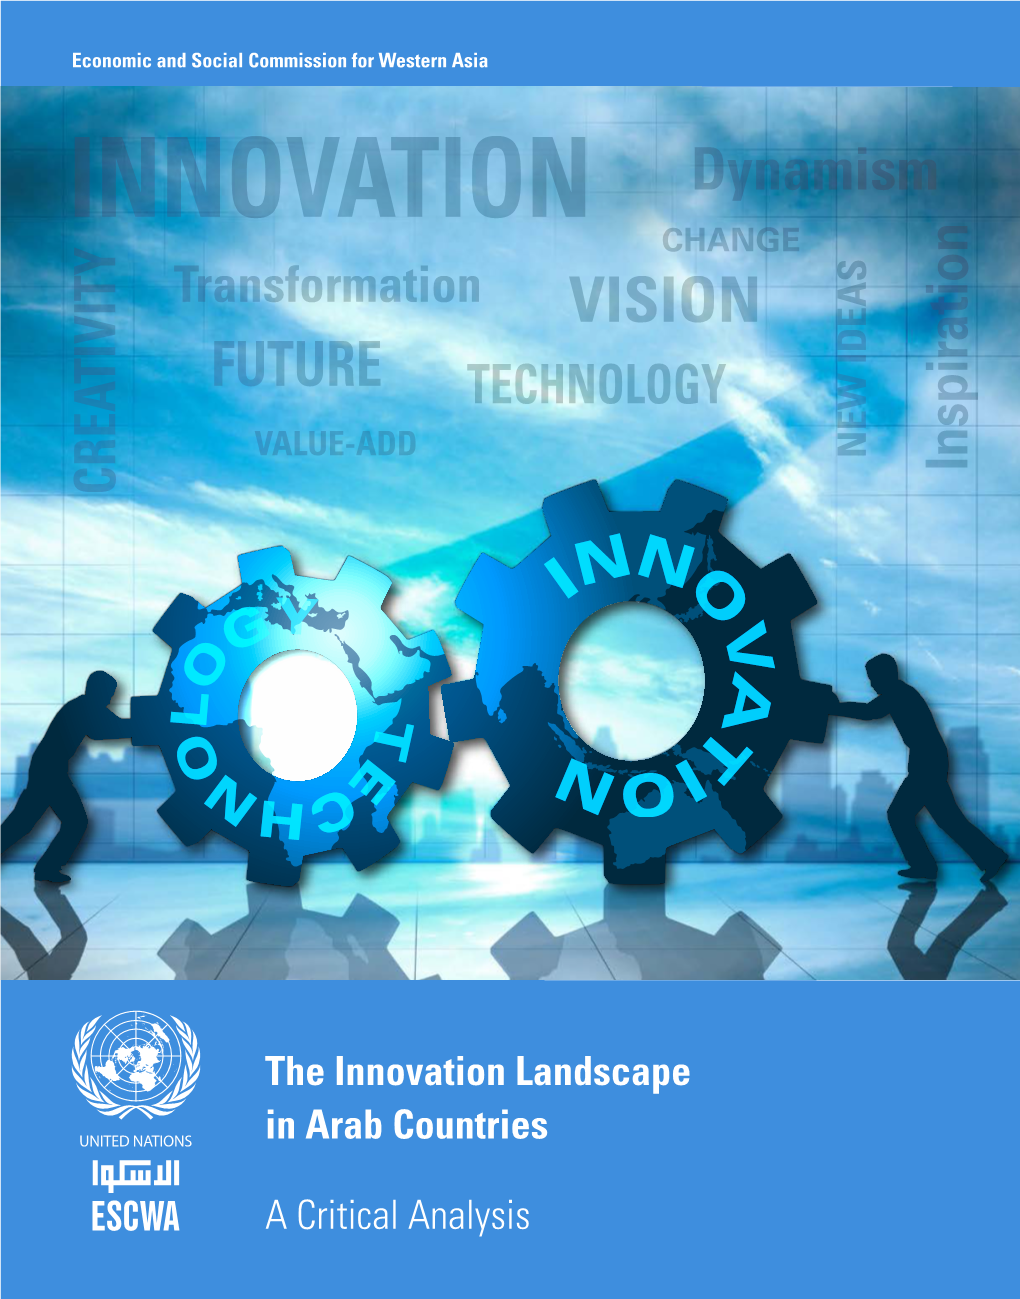 The Innovation Landscape in Arab Countries